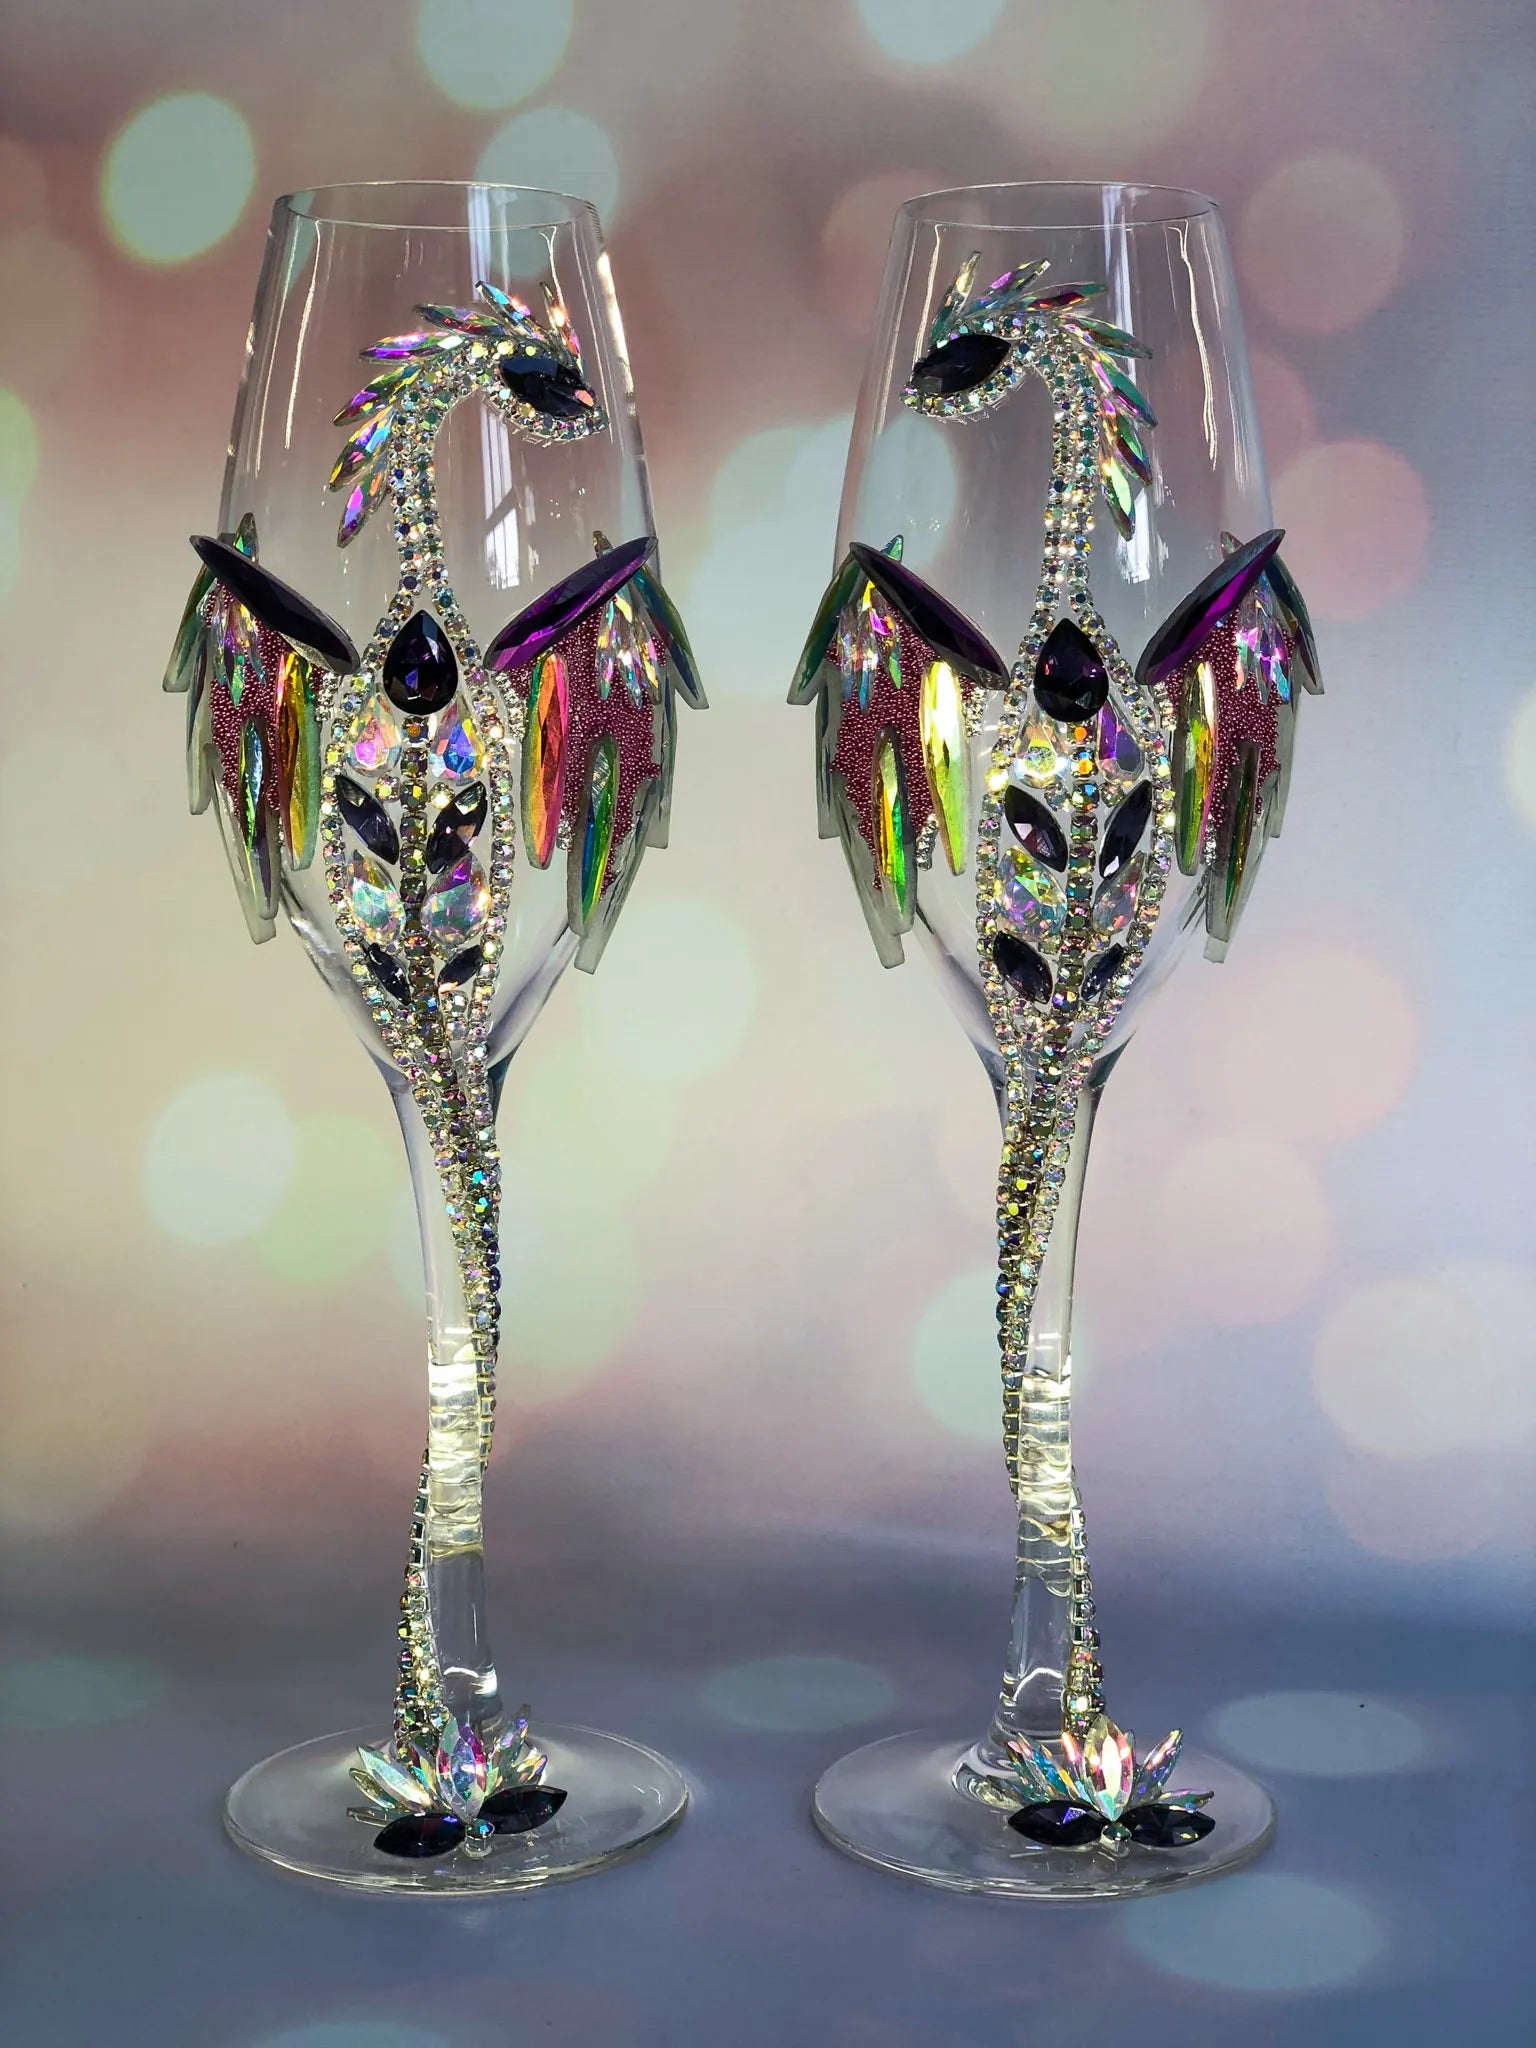 Pair of crystal-clear wineglasses adorned with vibrant holographic dragon motifs; the gems sparkle against a backdrop of soft pastel bokeh lights.